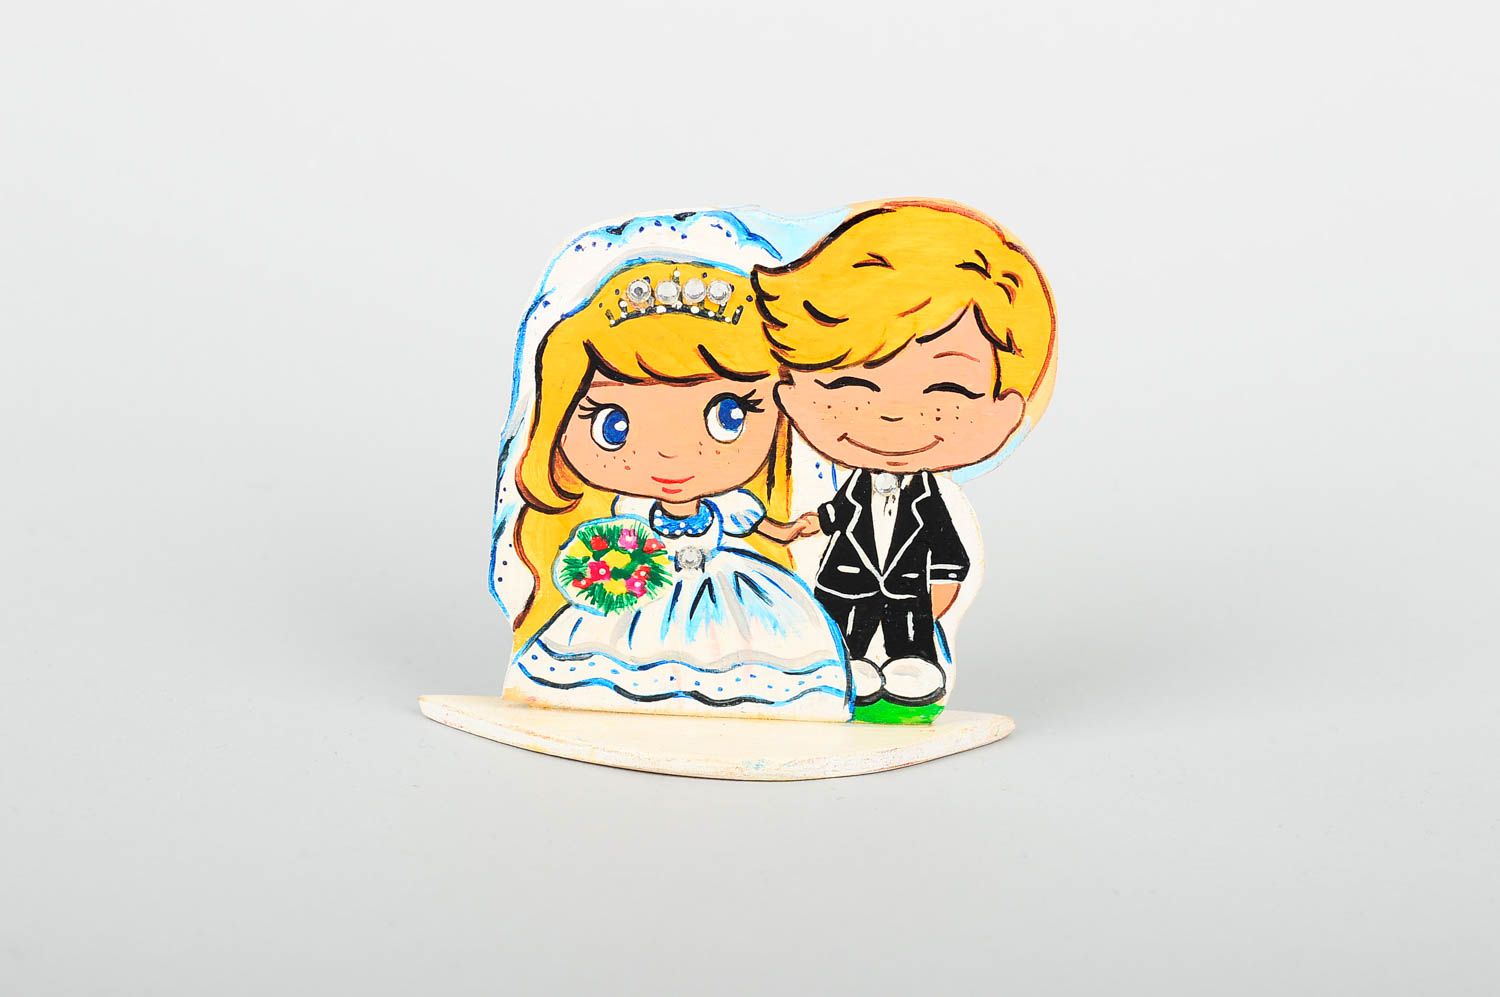 Funny handmade plywood figurine wedding decor cool rooms decorative use only photo 1